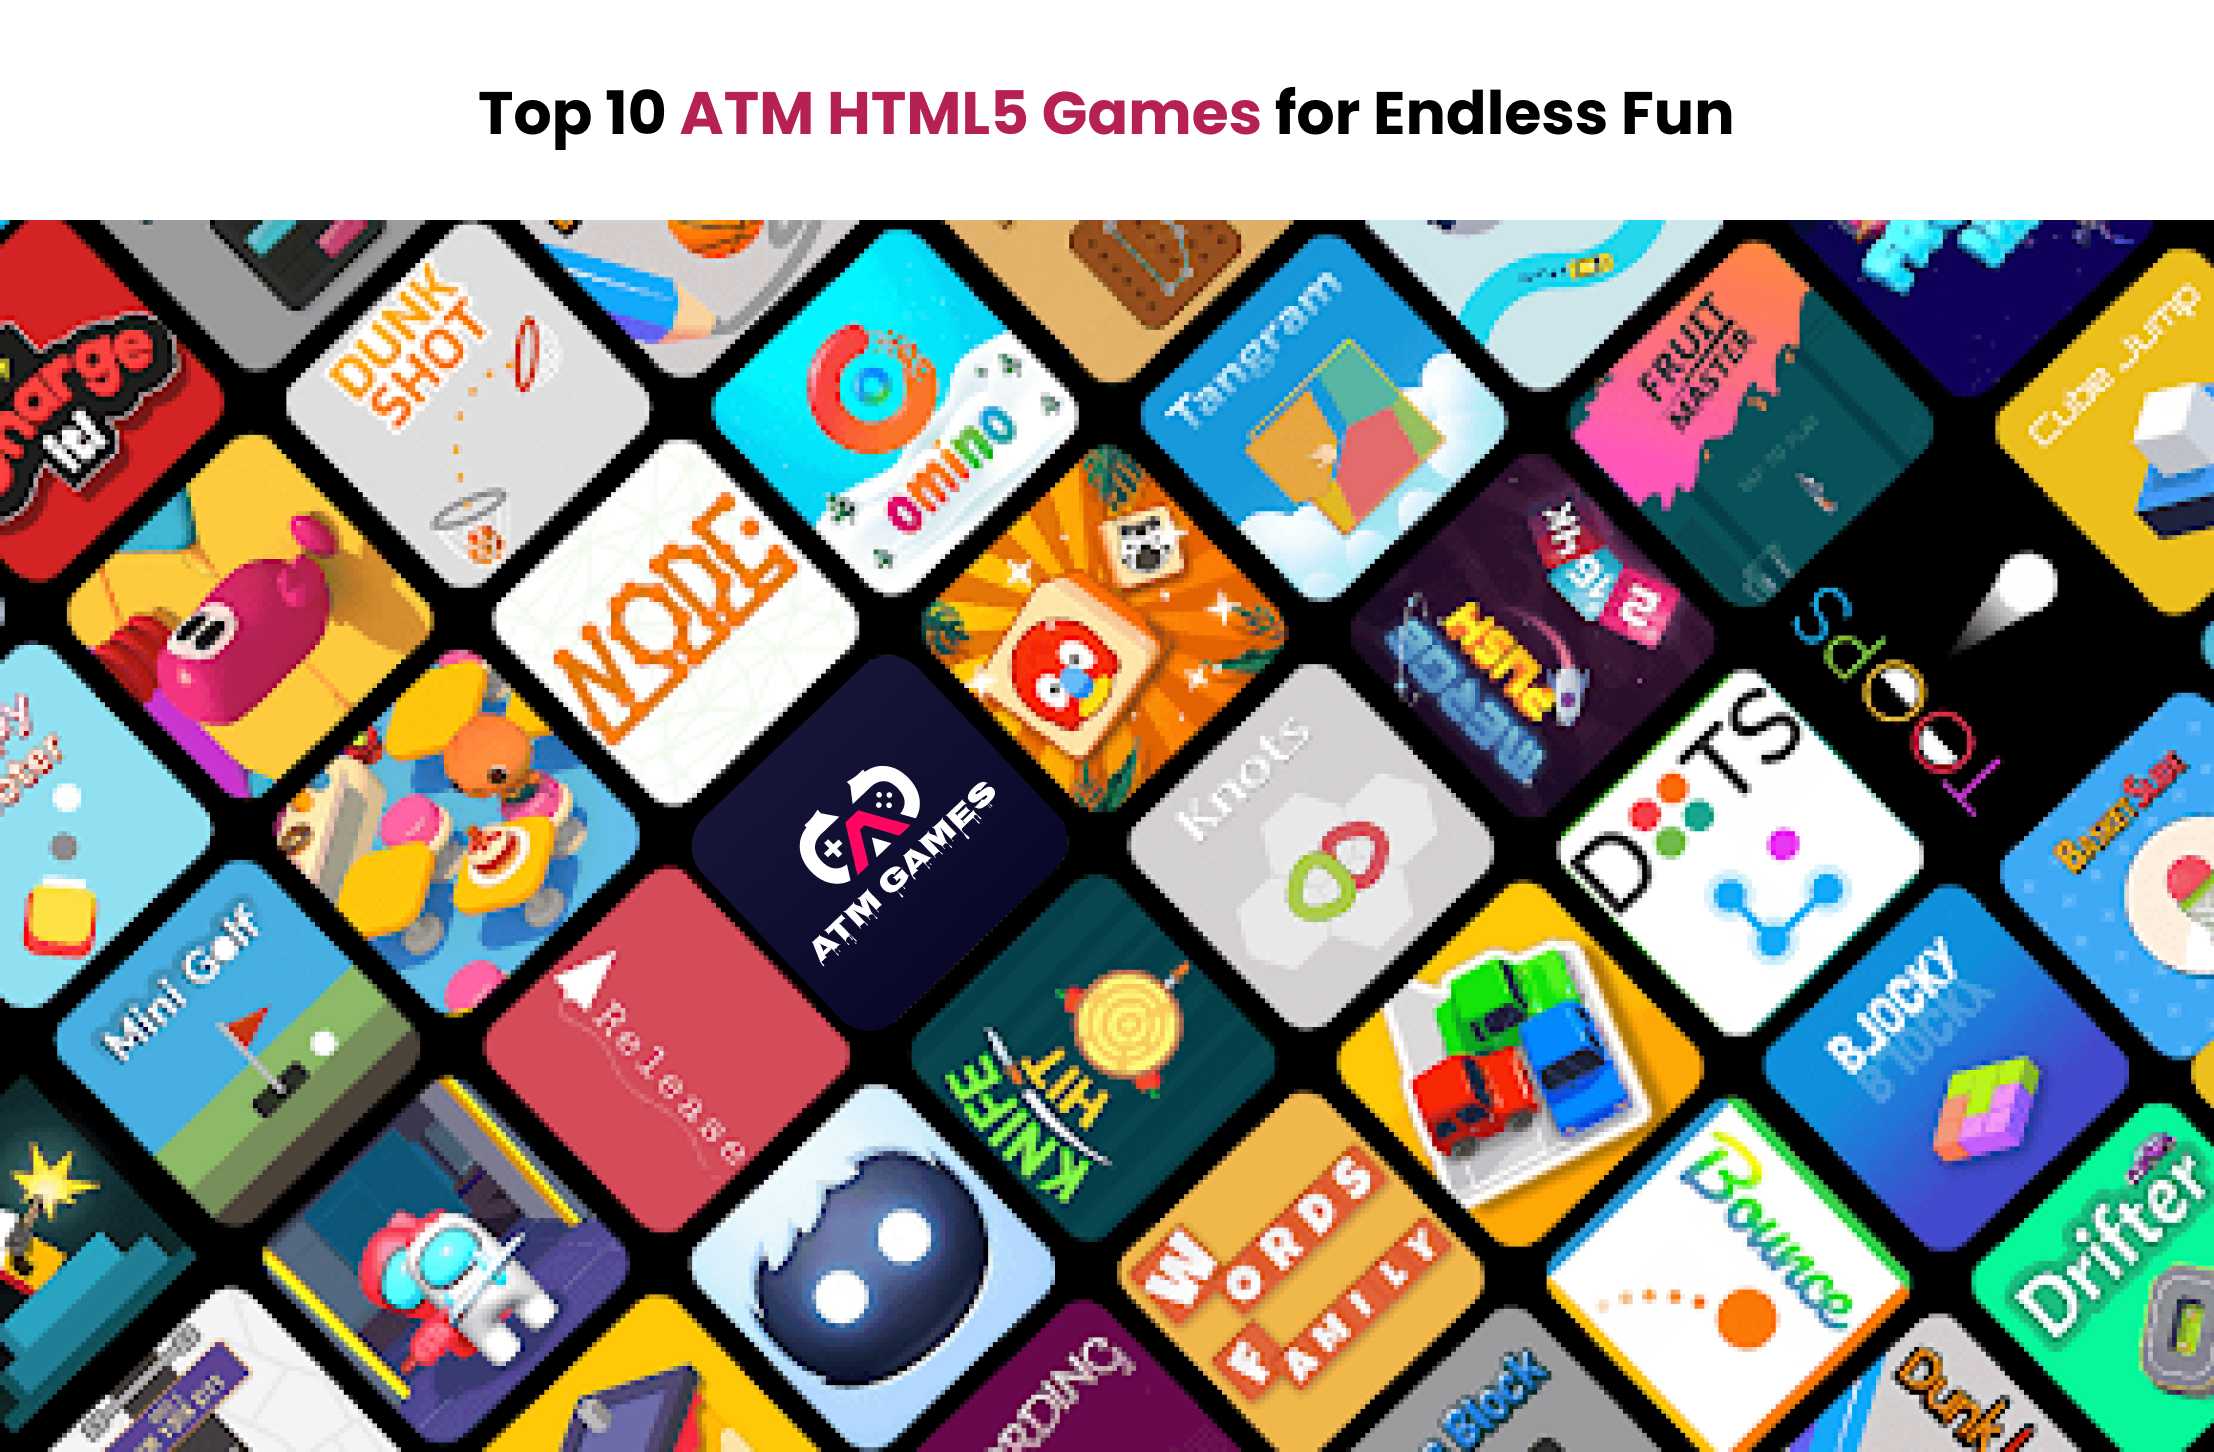 Top 10 ATM HTML5 Games for Endless Fun | ATM HTML GAMES